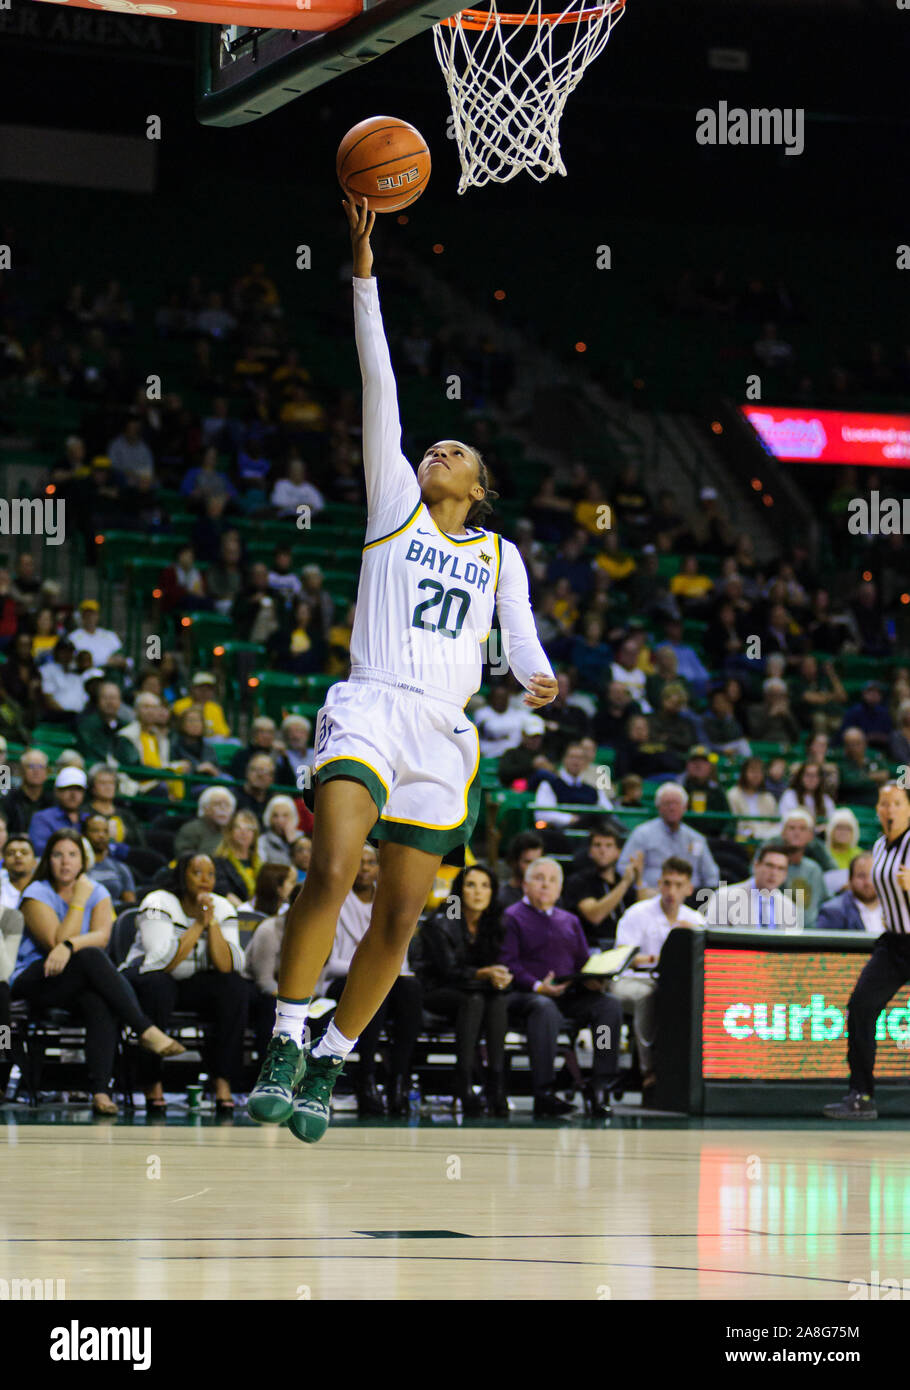 Waco, Texas, USA. 8th Nov, 2019. Baylor Lady Bears guard Juicy Landrum (20) goes up for a layup during the 2nd half of the NCAA Women's Basketball game between Grambling Lady Tigers and the Baylor Bears at The Ferrell Center in Waco, Texas. Matthew Lynch/CSM/Alamy Live News Stock Photo